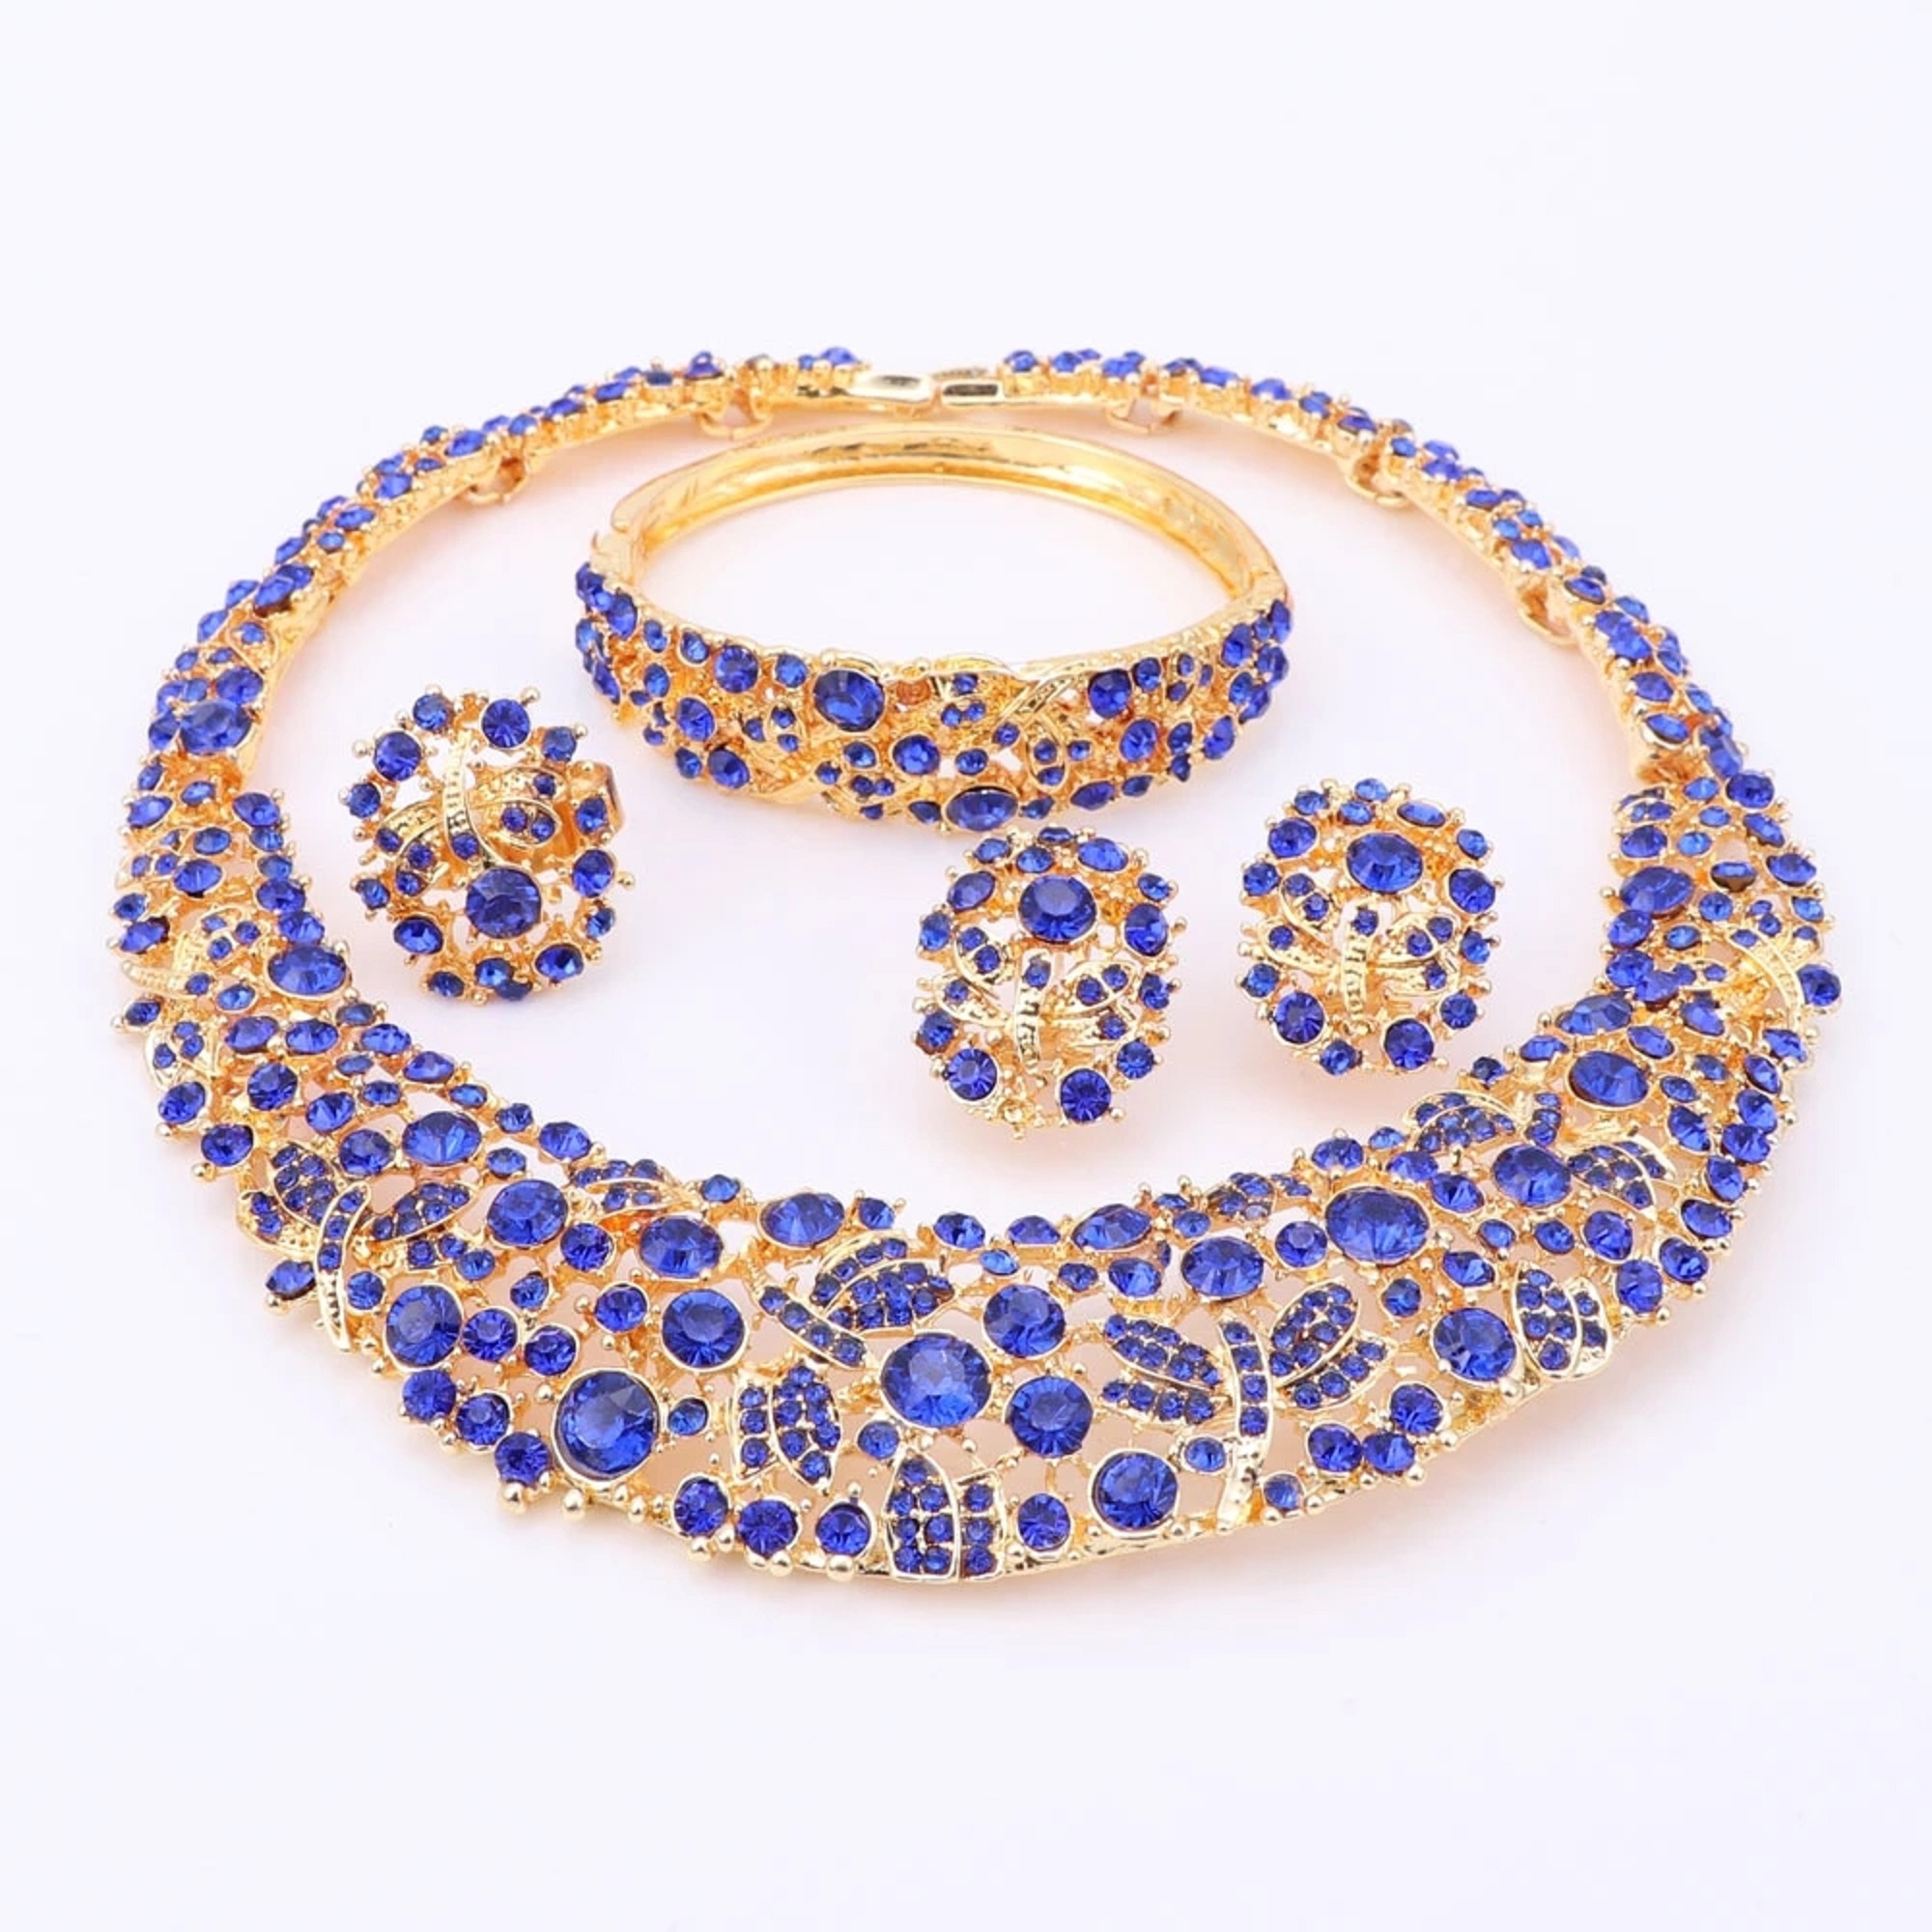 Women Party Bridal Fine Colorful Rhinestone African Beads Jewelry Sets For Wedding Party Dinner Dress Accessories Jewelry Sets269N